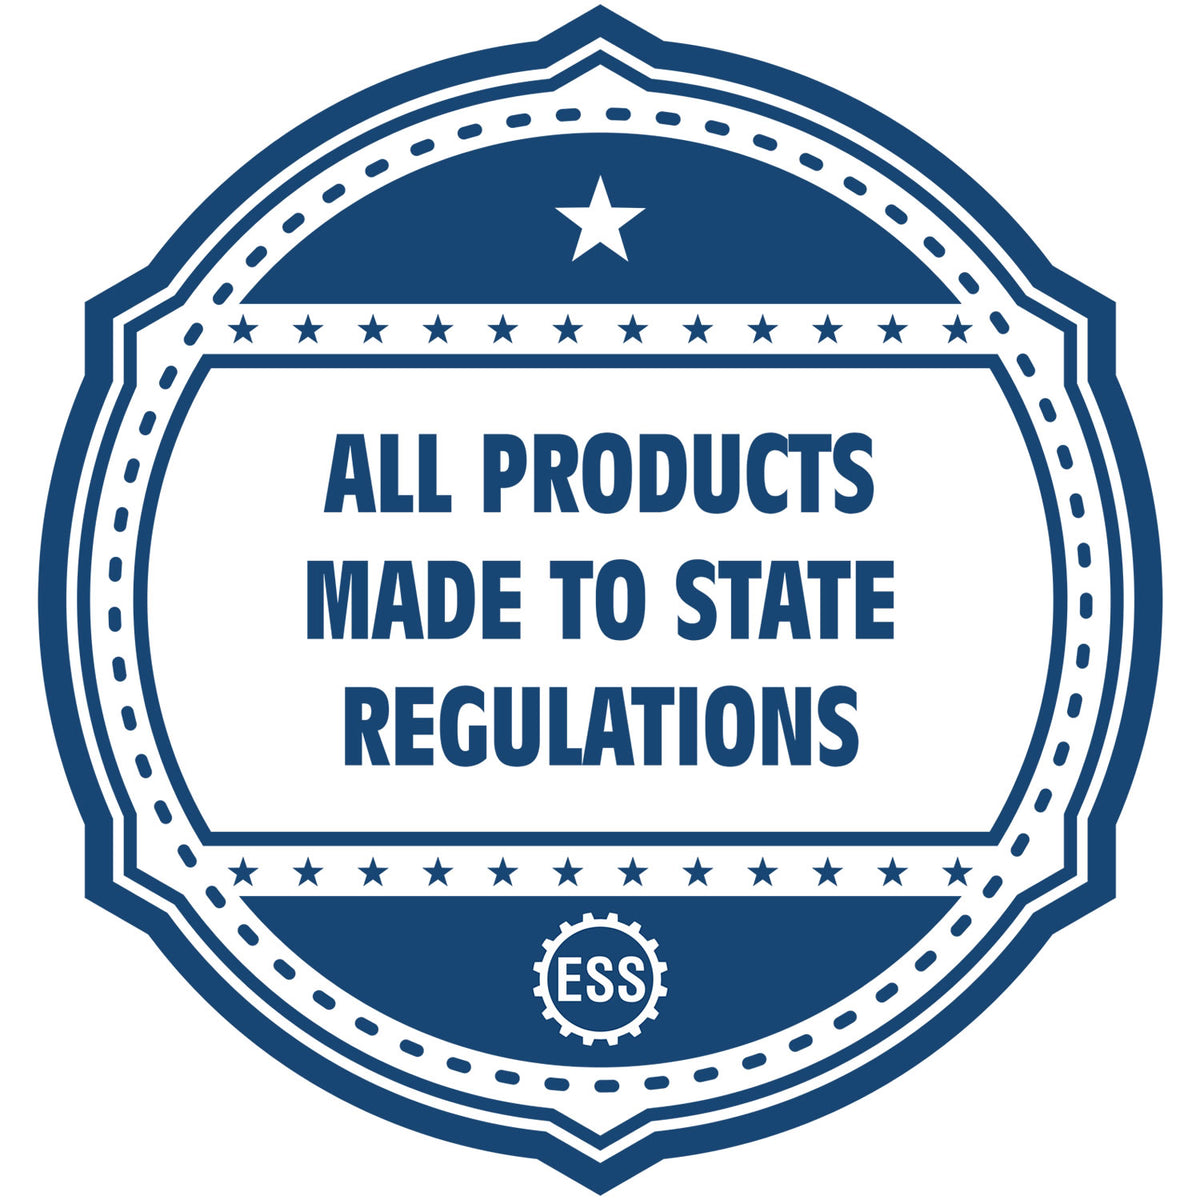 An icon or badge element for the Long Reach Alabama PE Seal showing that this product is made in compliance with state regulations.